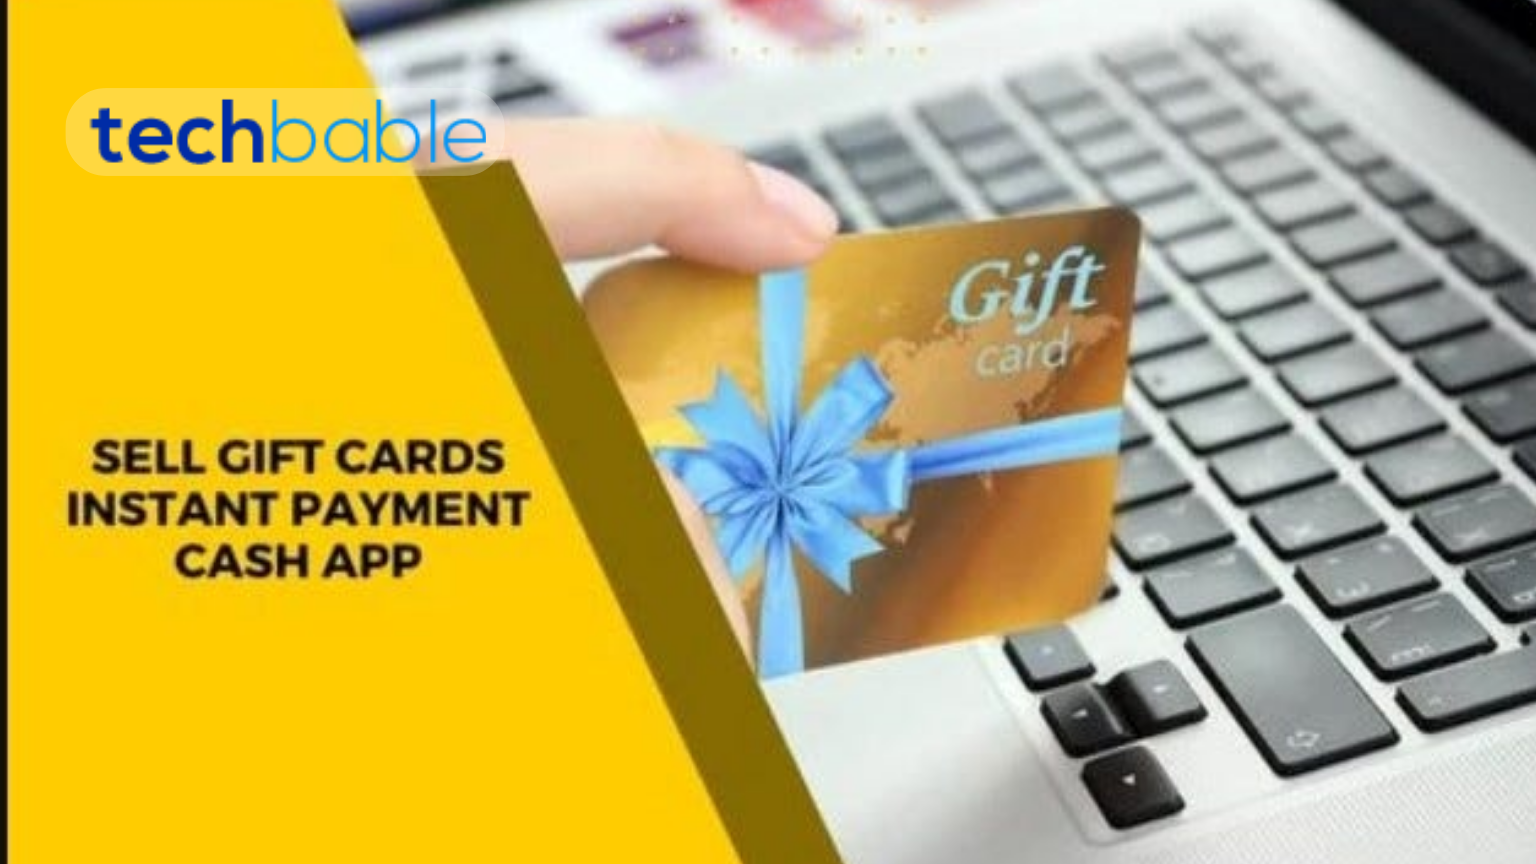 Sell gift cards instant payment cash app